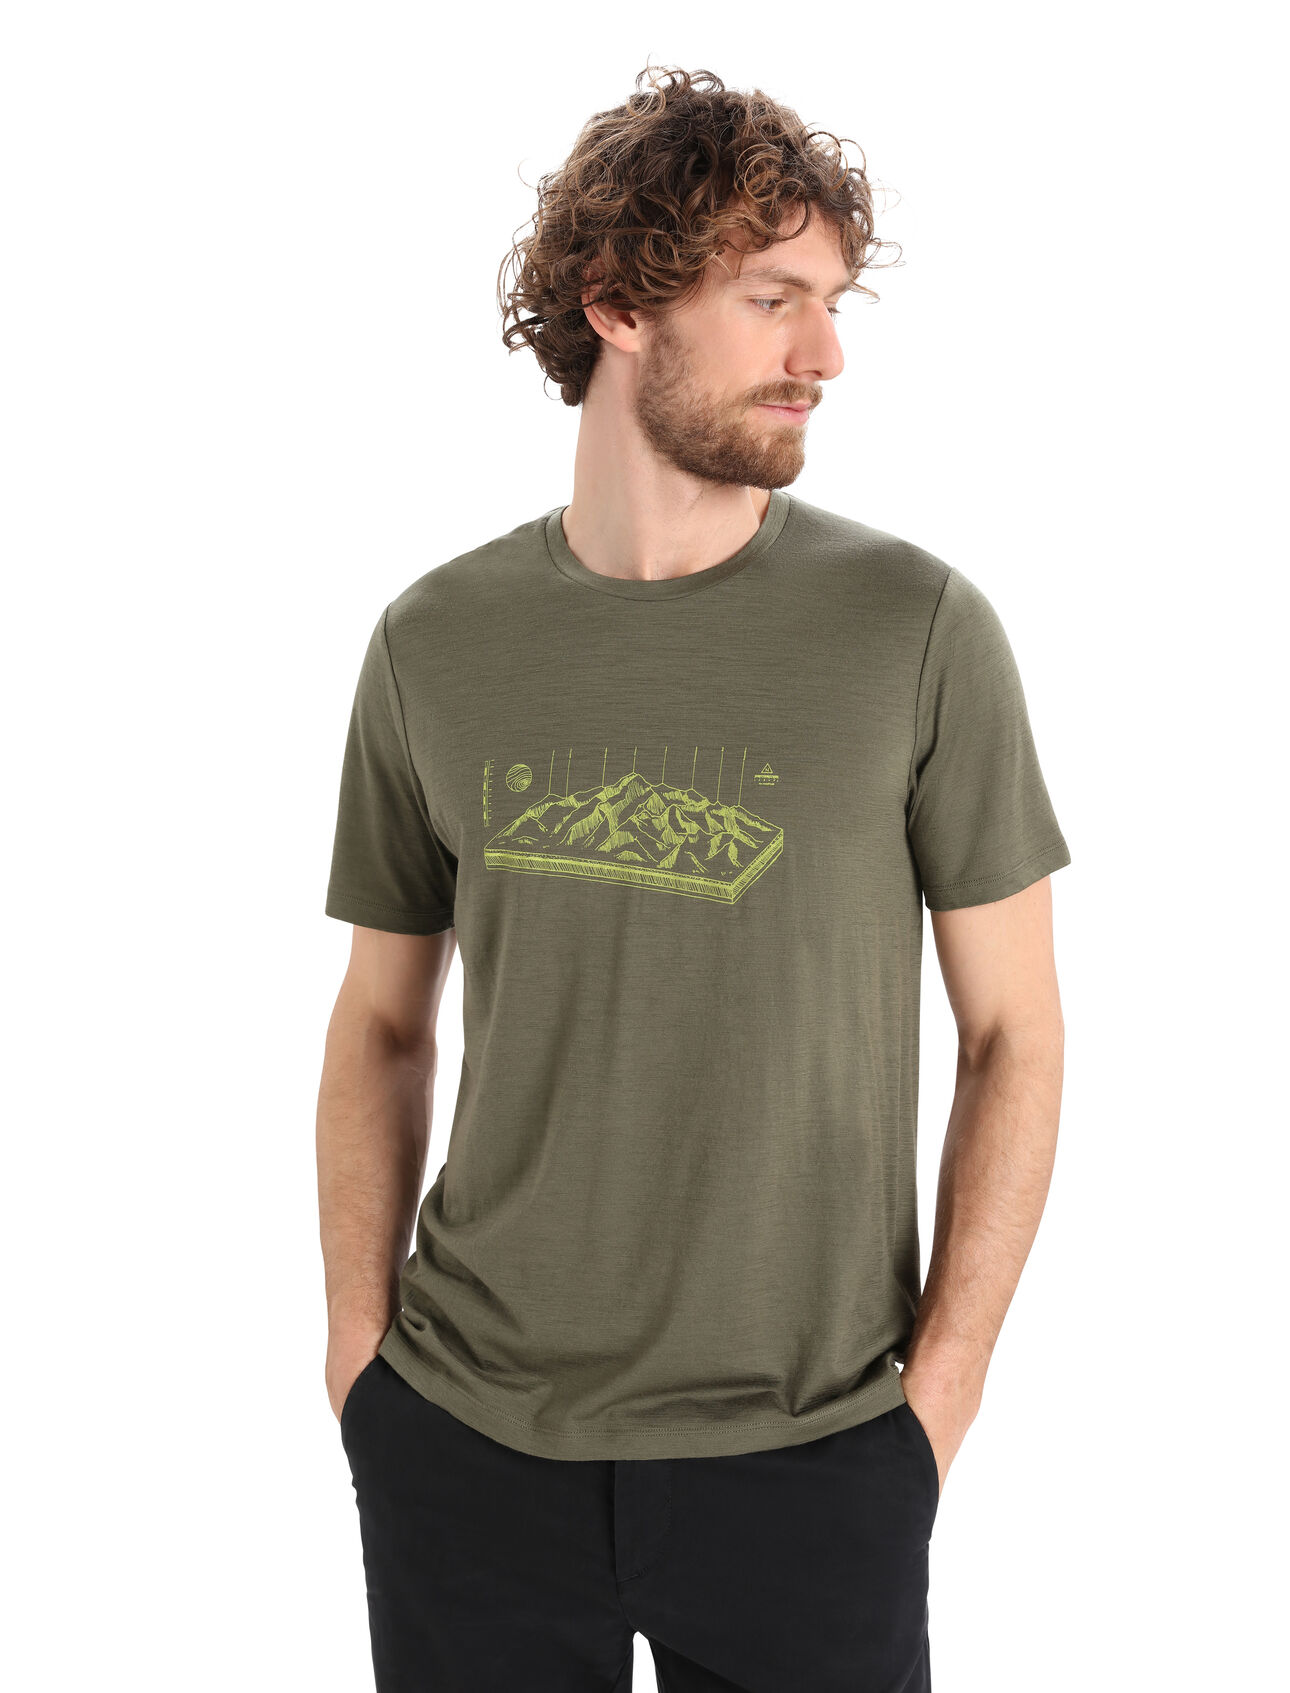 Mens Merino Tech Lite II Short Sleeve T-Shirt Alps 3D Our versatile tech tee that provides comfort, breathability and natural odor-resistance for any adventure you can think of, the Tech Lite II Short Sleeve Tee Alps 3D features 100% merino for all-natural performance. The tee’s original artwork features a hand-drawn sketch inspired by the Mont Blanc region of the Alps.